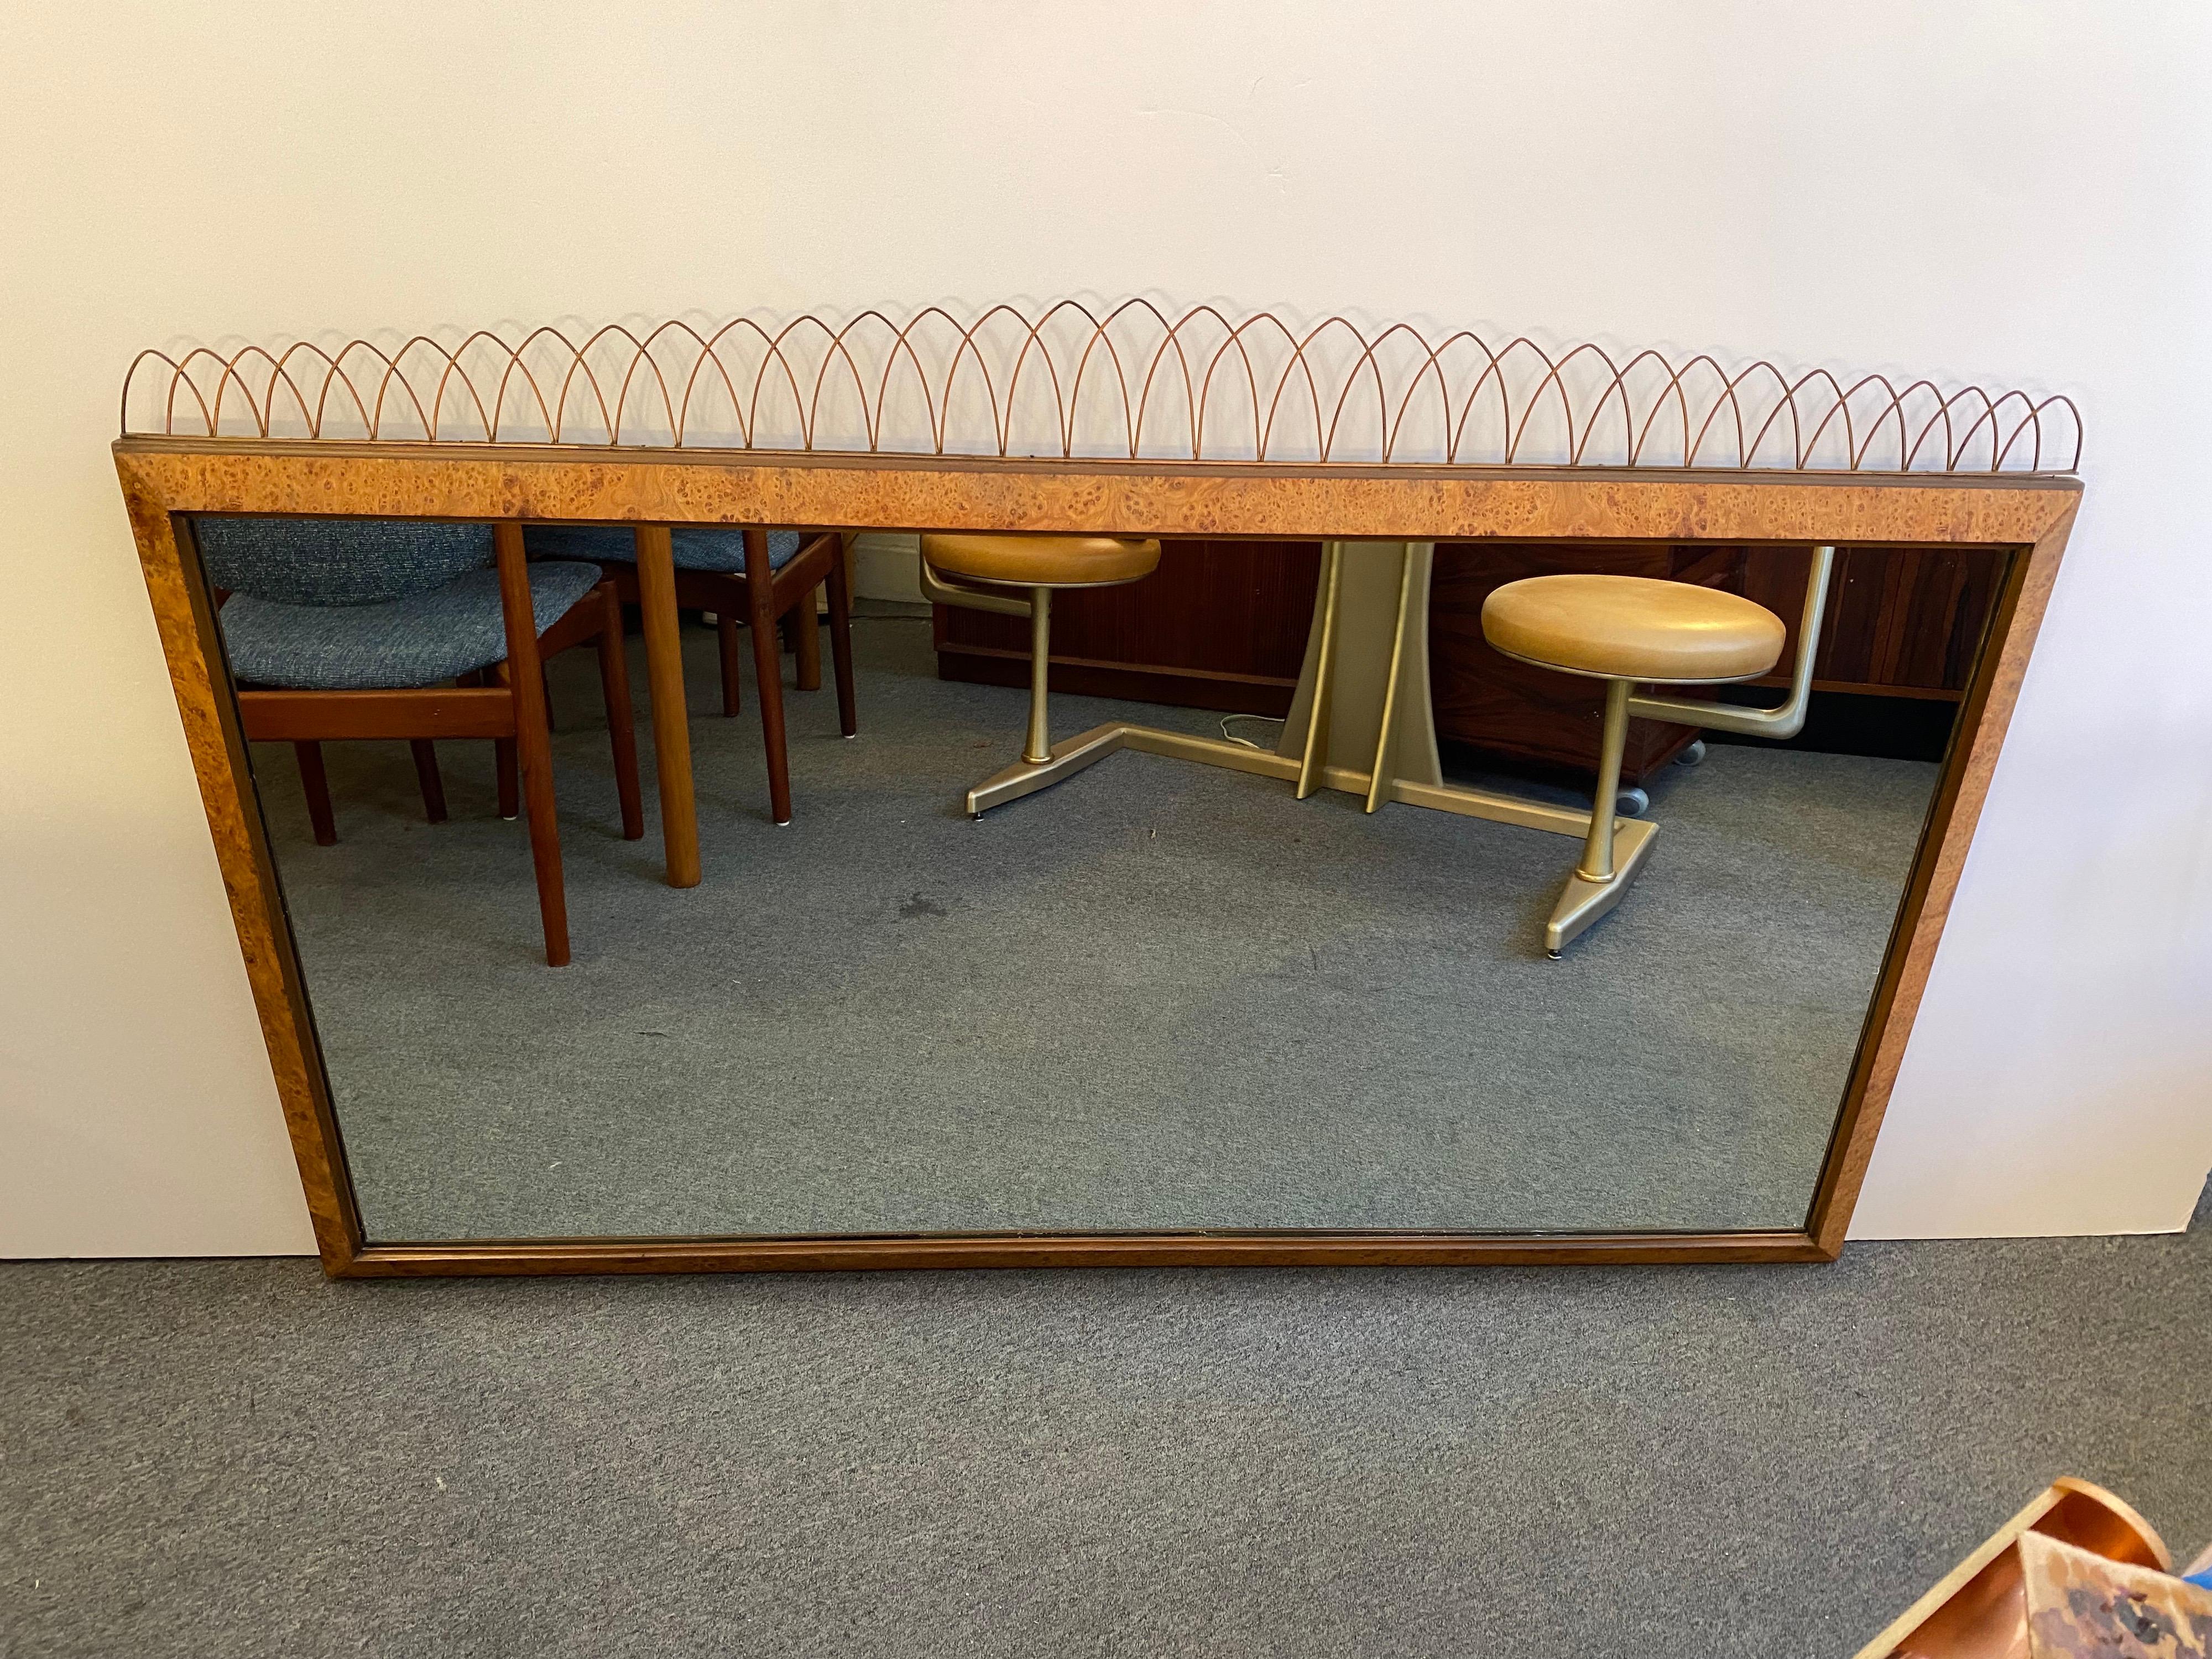 Burled walnut framed mirror with metal crown detail on the top. Beautiful mirror to place above a modern credenza or dresser.